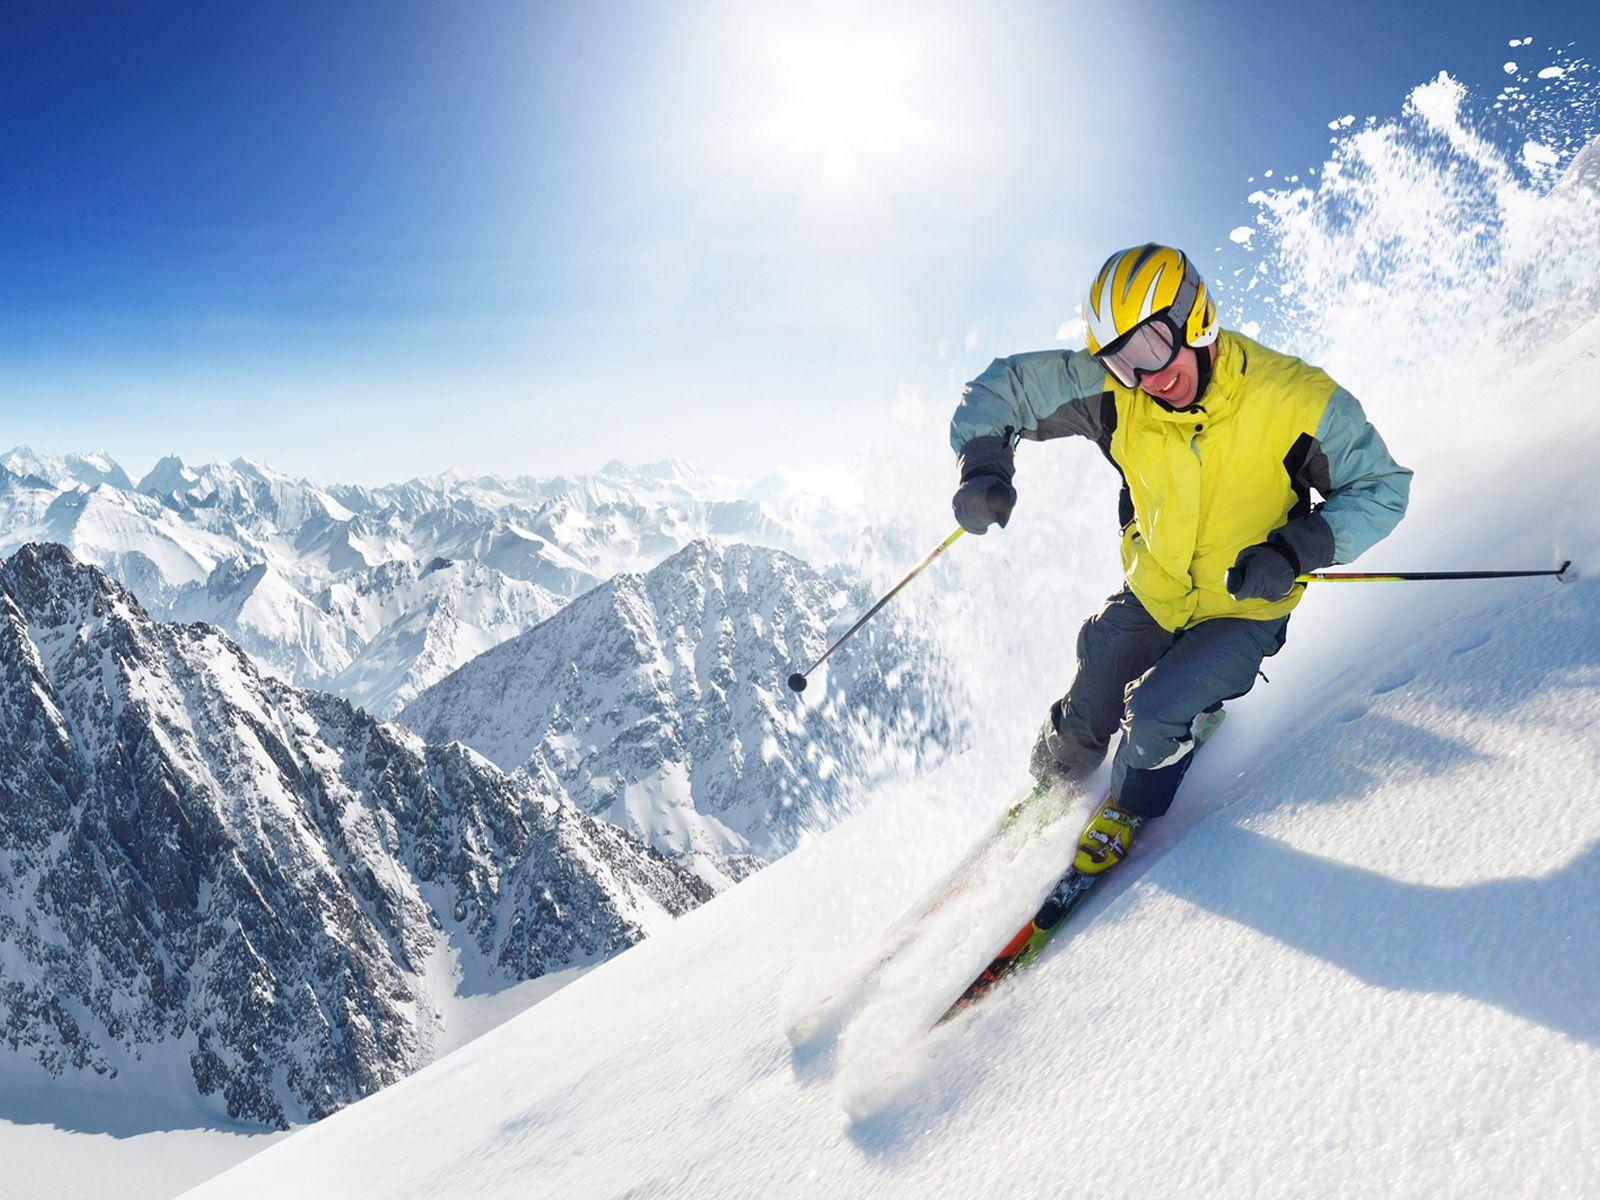 Skiing Wallpapers Top Free Skiing Backgrounds Wallpaperaccess 8637